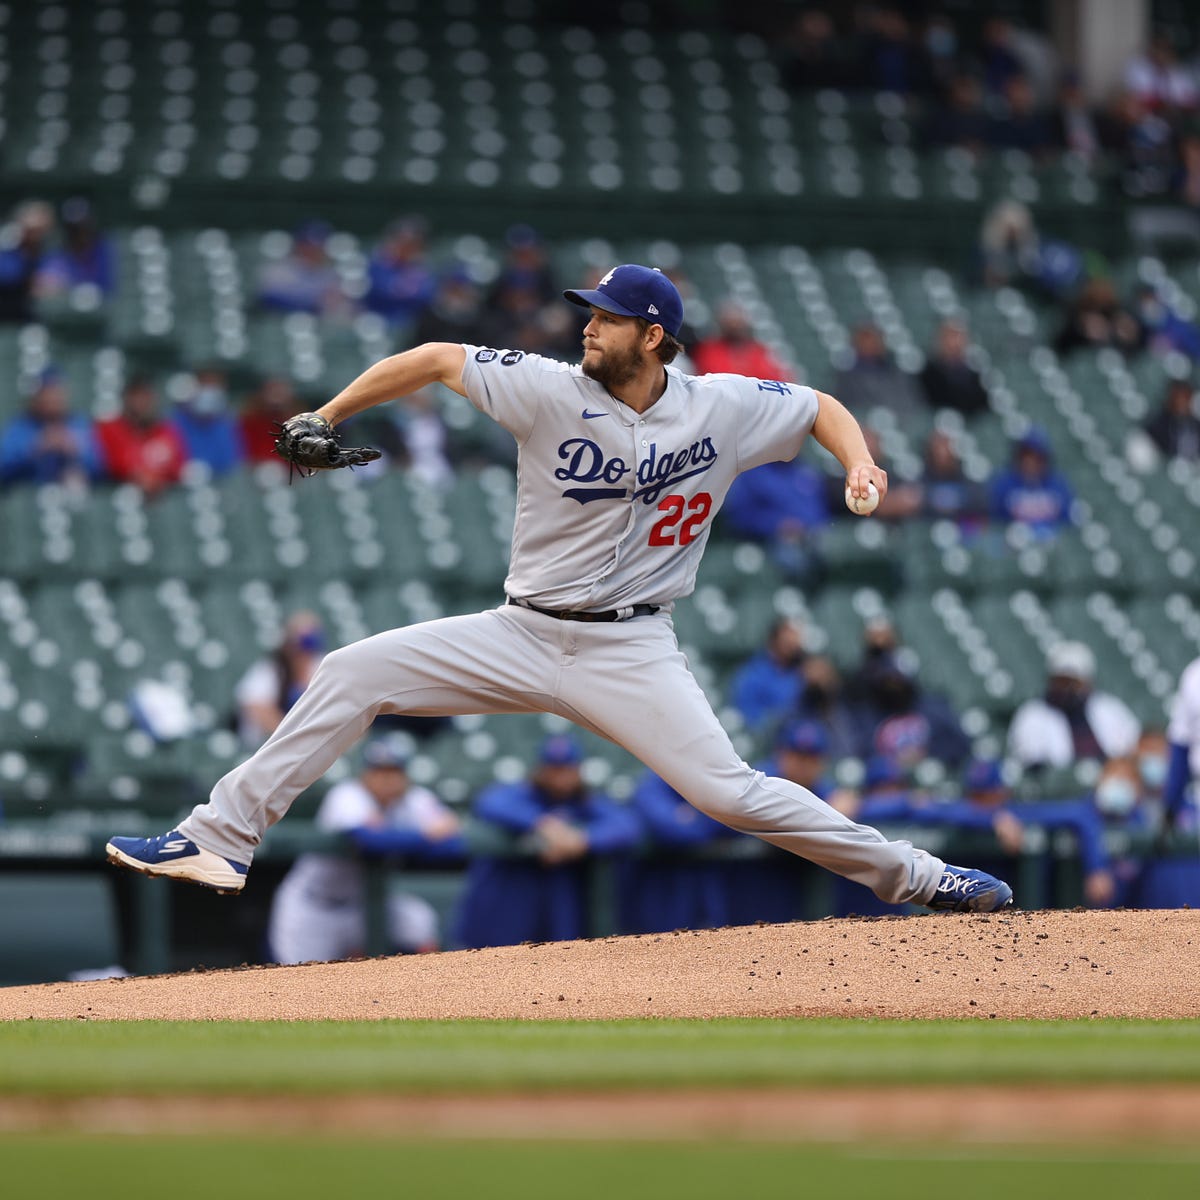 Barnes signs a deal to stay with the Dodgers through 2024, by Cary Osborne